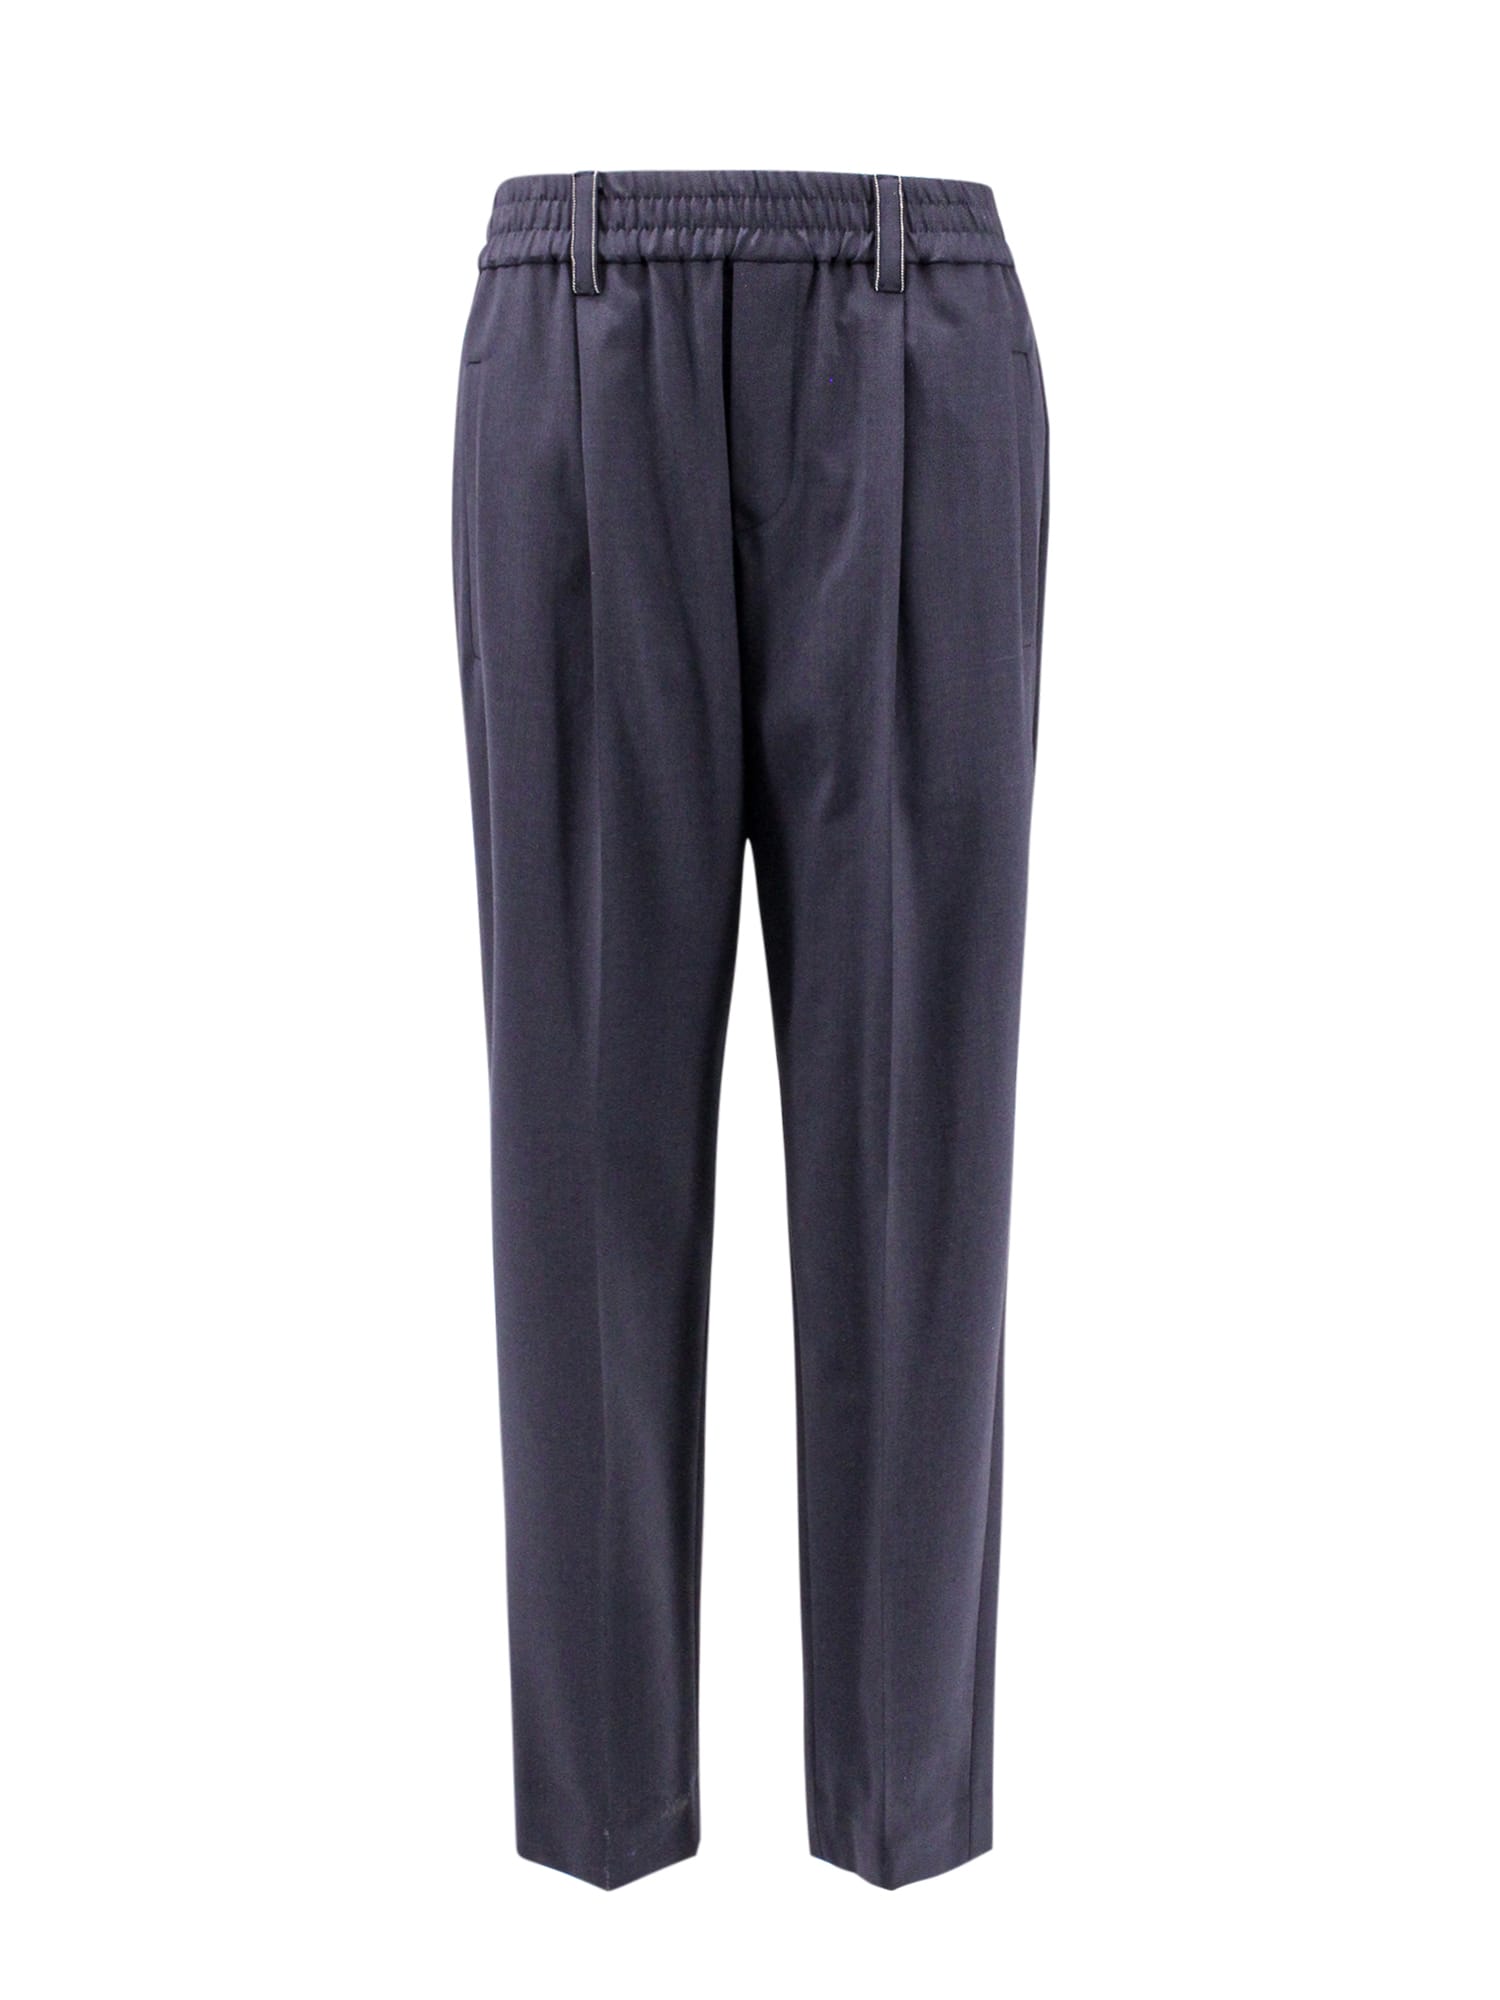 Brunello Cucinelli Trousers Made Of Fine Fresh Stretch Wool With Elastic Waistband And Side Welt Pockets